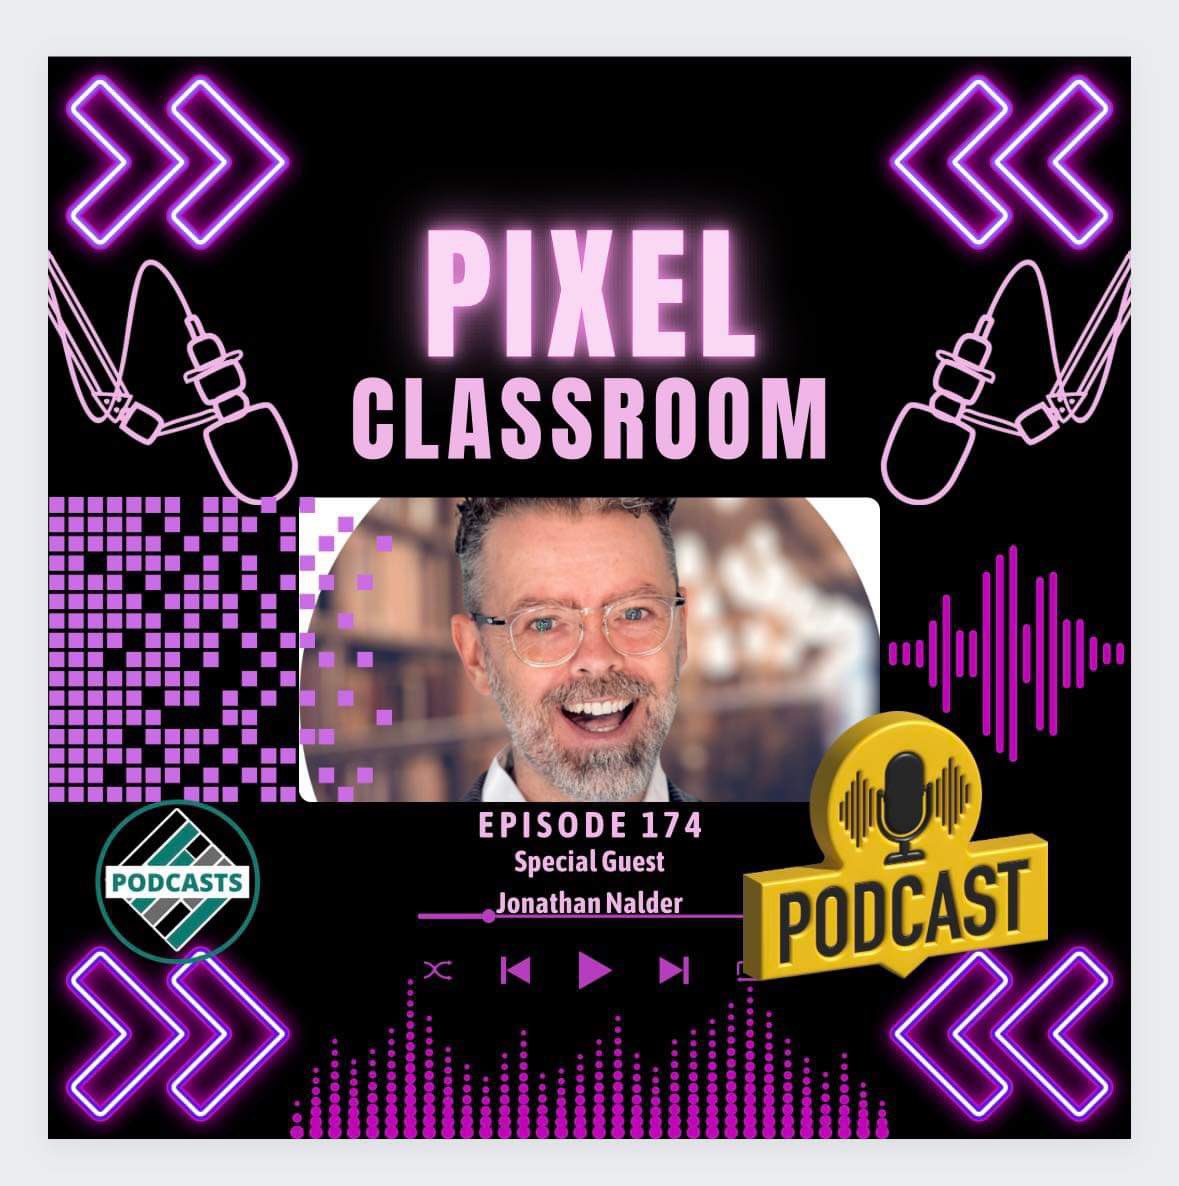 Where is #Edtech is up to?
Great chat w’ @Ryan7Read! Loved our focus on how @stempunksau work is thriving by combining pedagogy + humanities 👾🤔 

Topics: #InnovationSports #esports #DesignThinking #Minecraft #Microbit #ARVRinEdu

podcasters.spotify.com/pod/show/pixel…